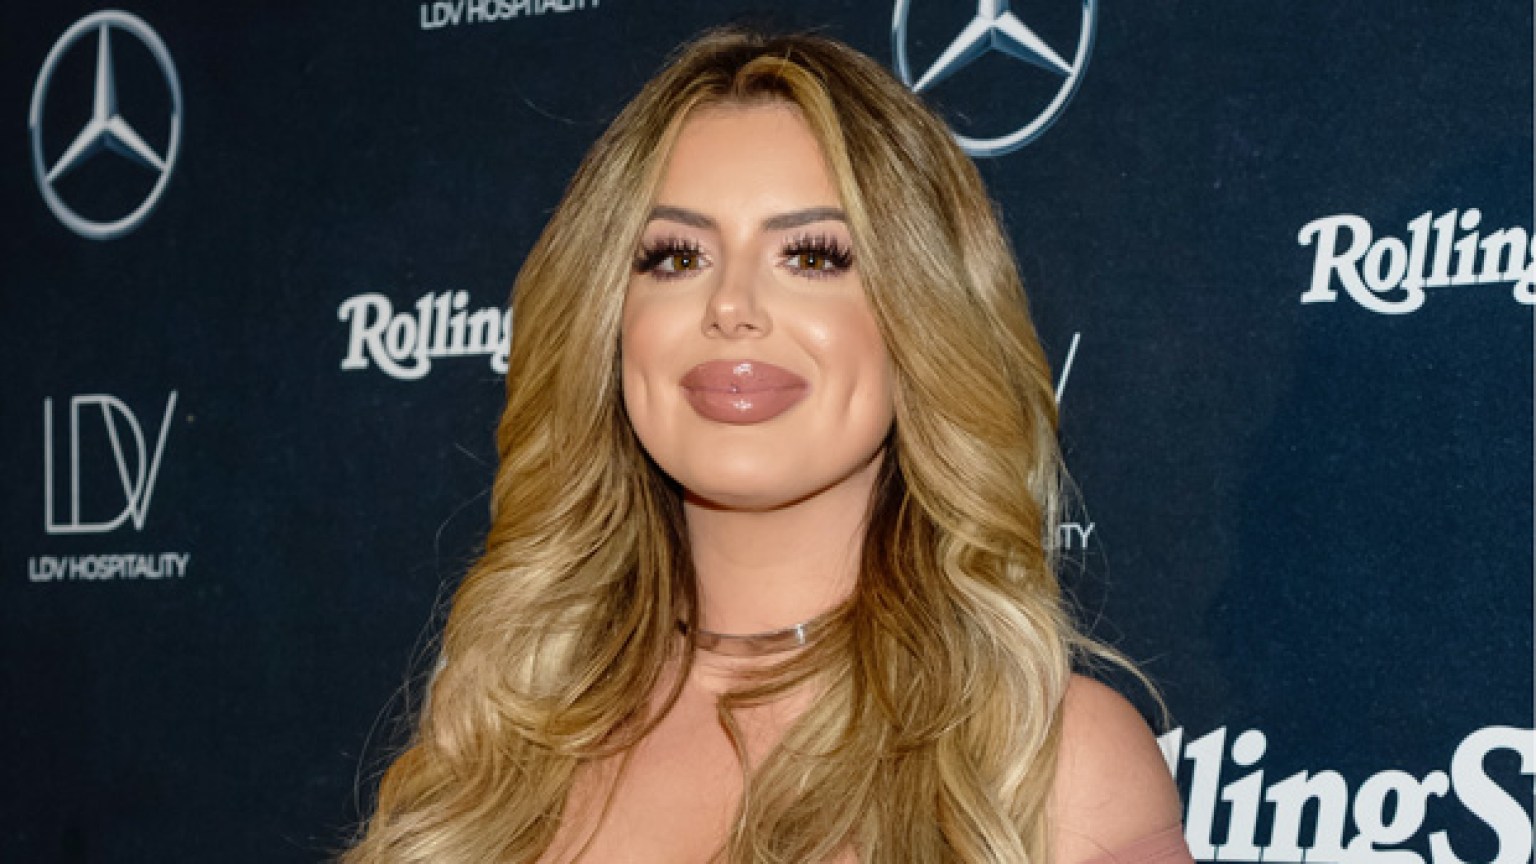 Brielle Biermann Shows Off Big Lips And Cleavage In ‘kab Cosmetics Pics